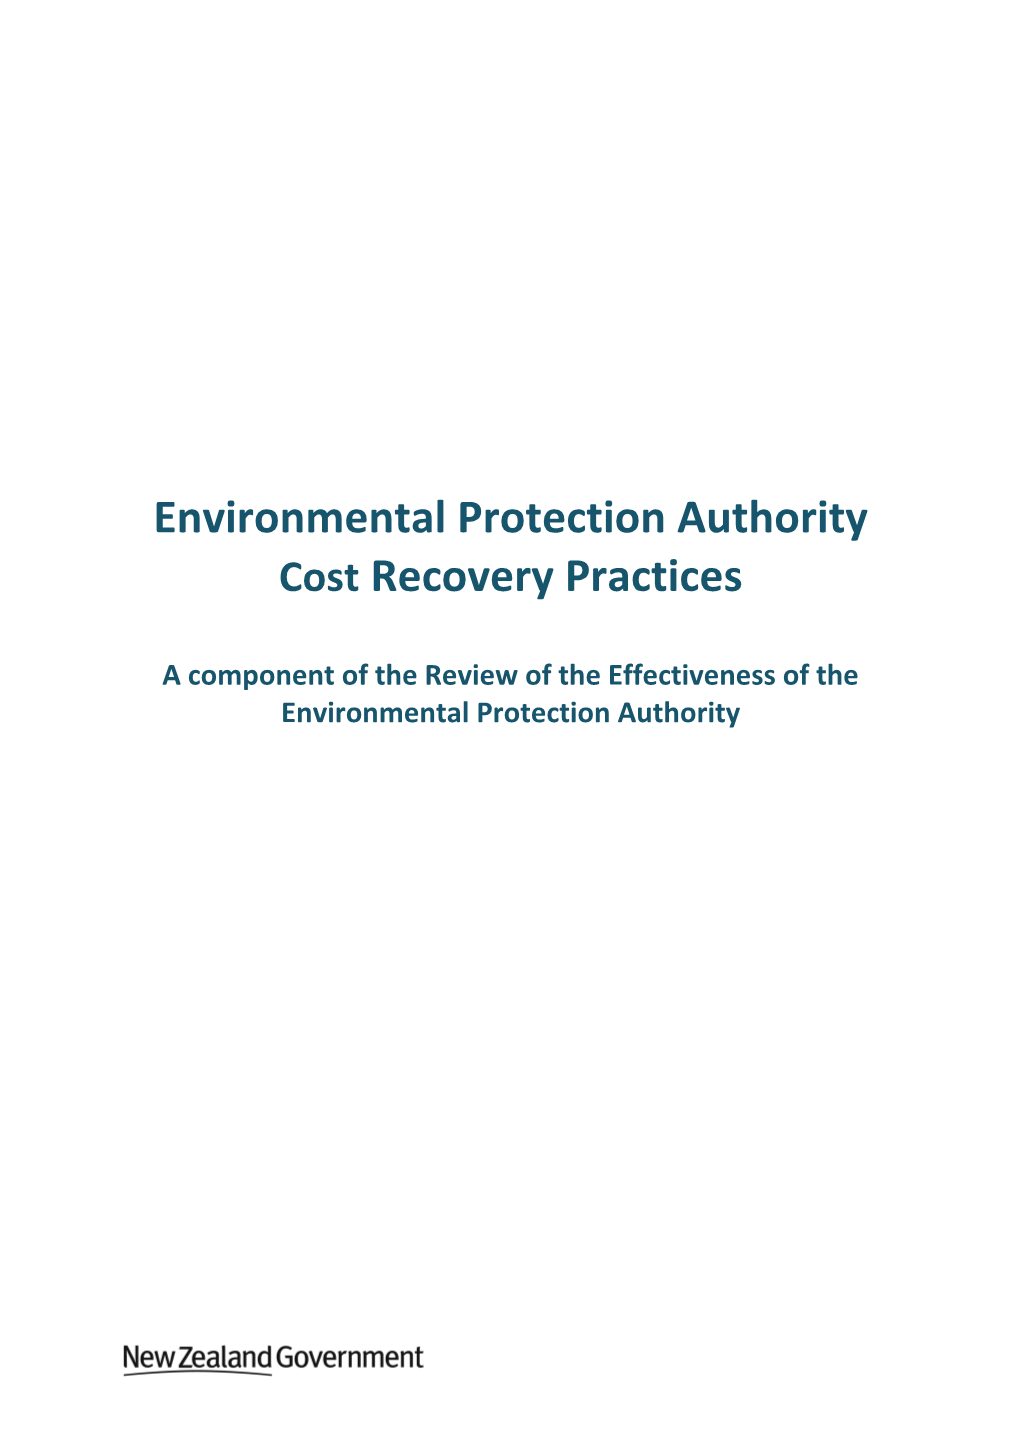 FINAL- EPA Review - Cost Recovery Report